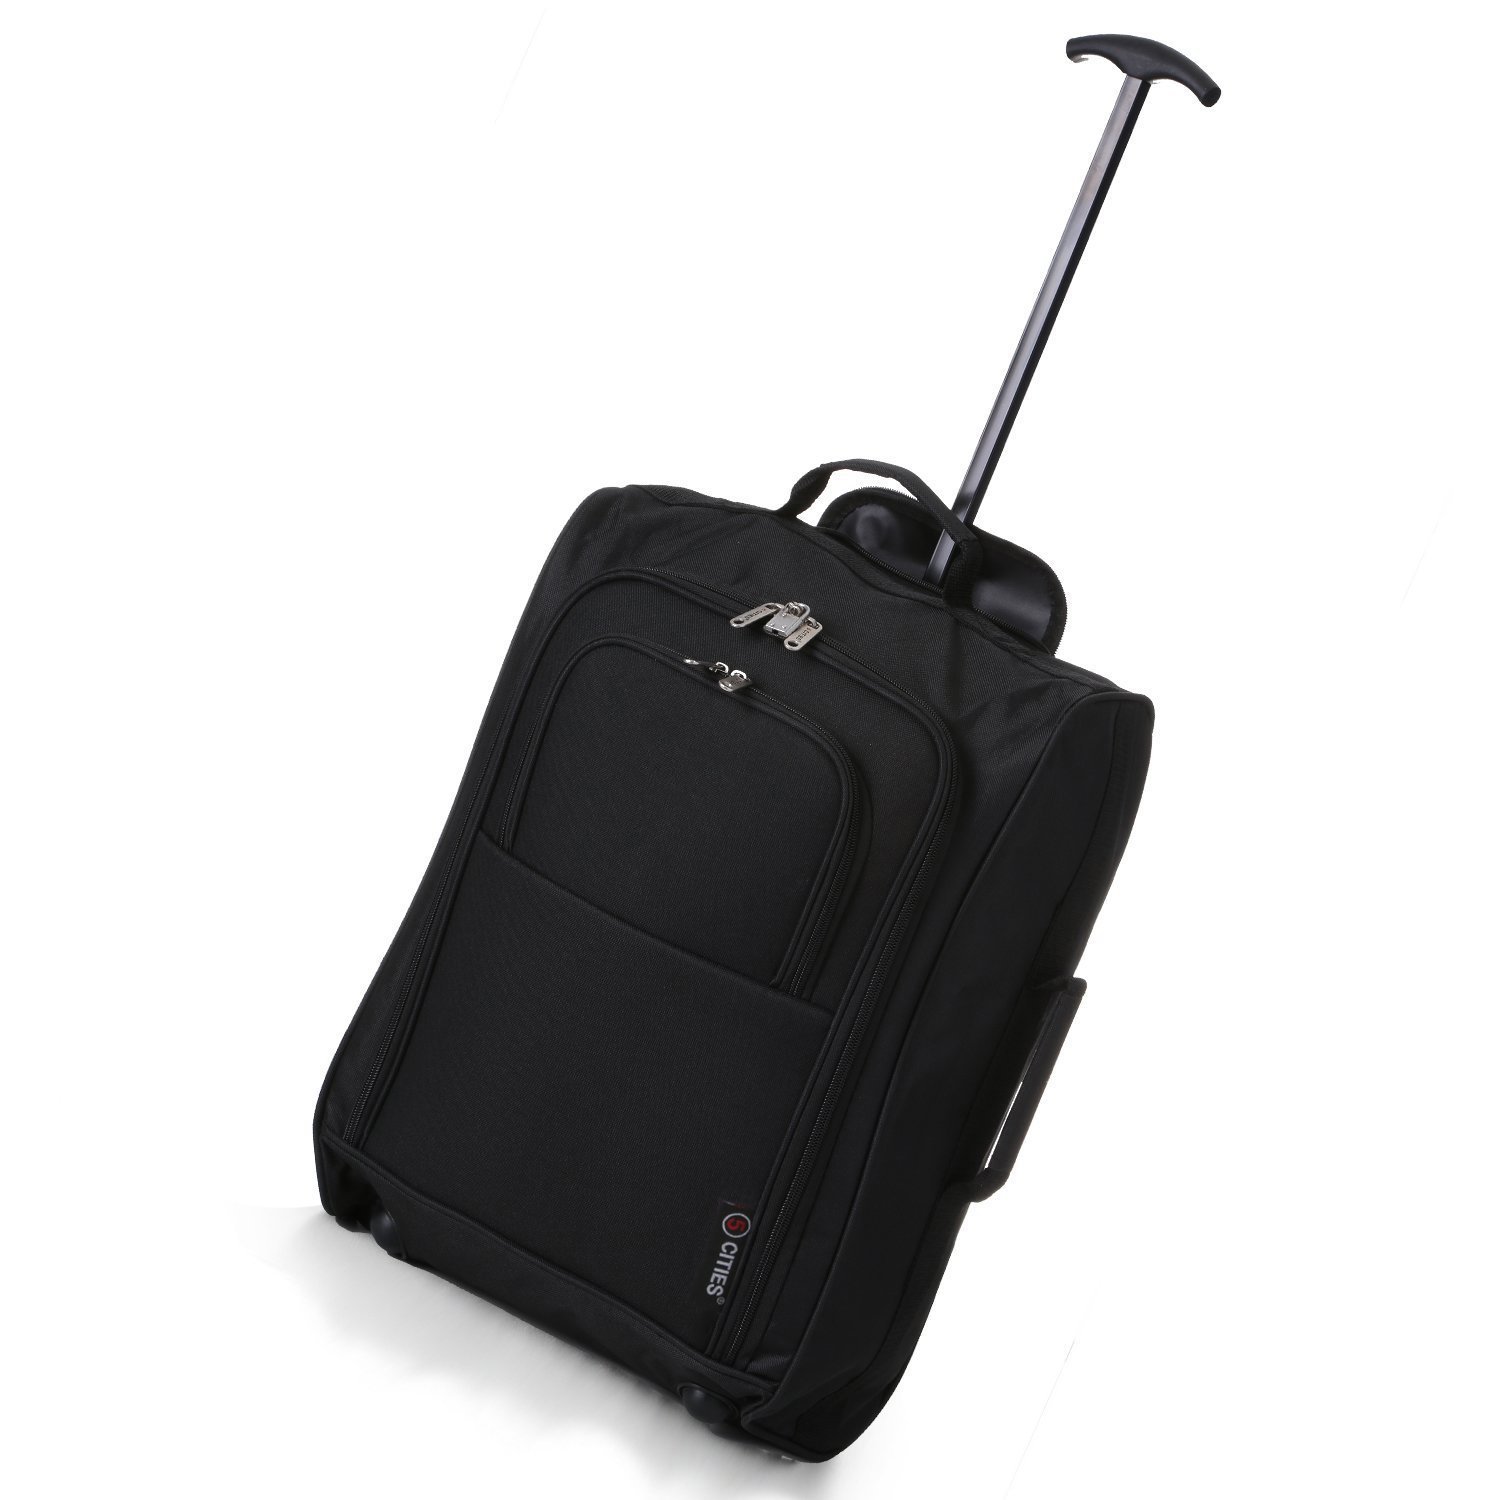 UK Luggage Buying Guide 2019 - All Baggage Types Explained